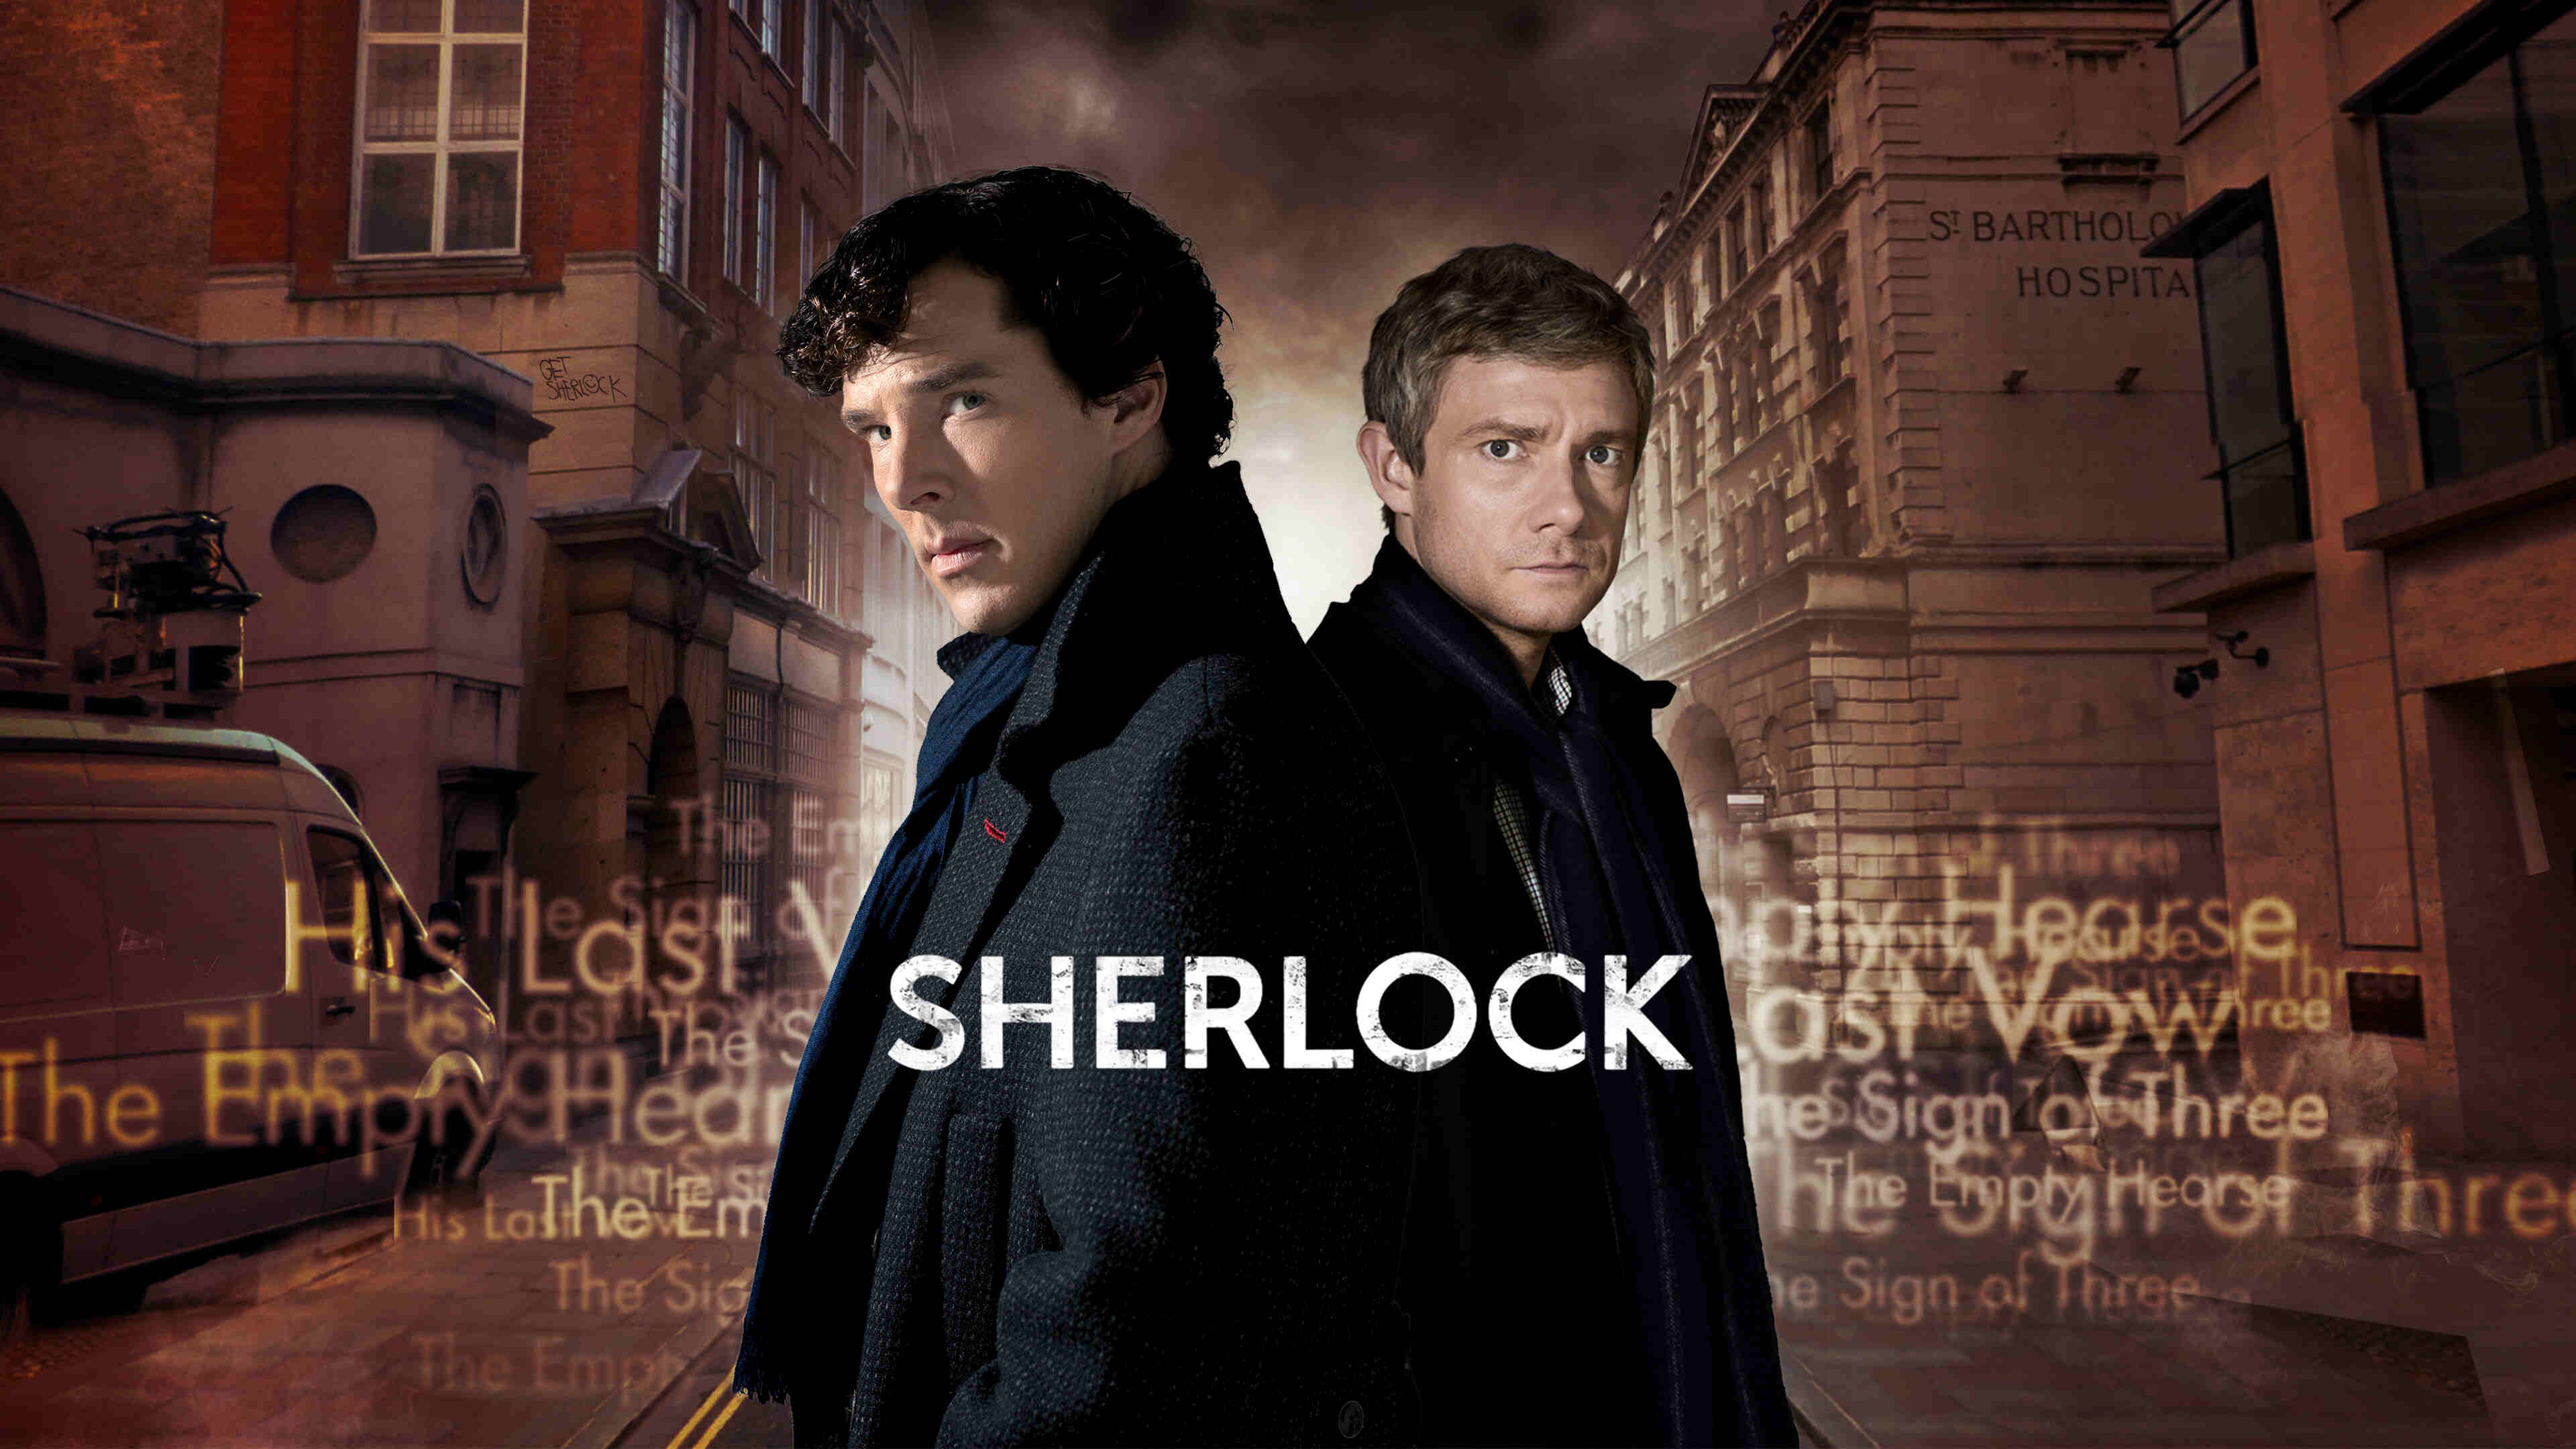 35-facts-about-the-movie-sherlock-his-last-vow